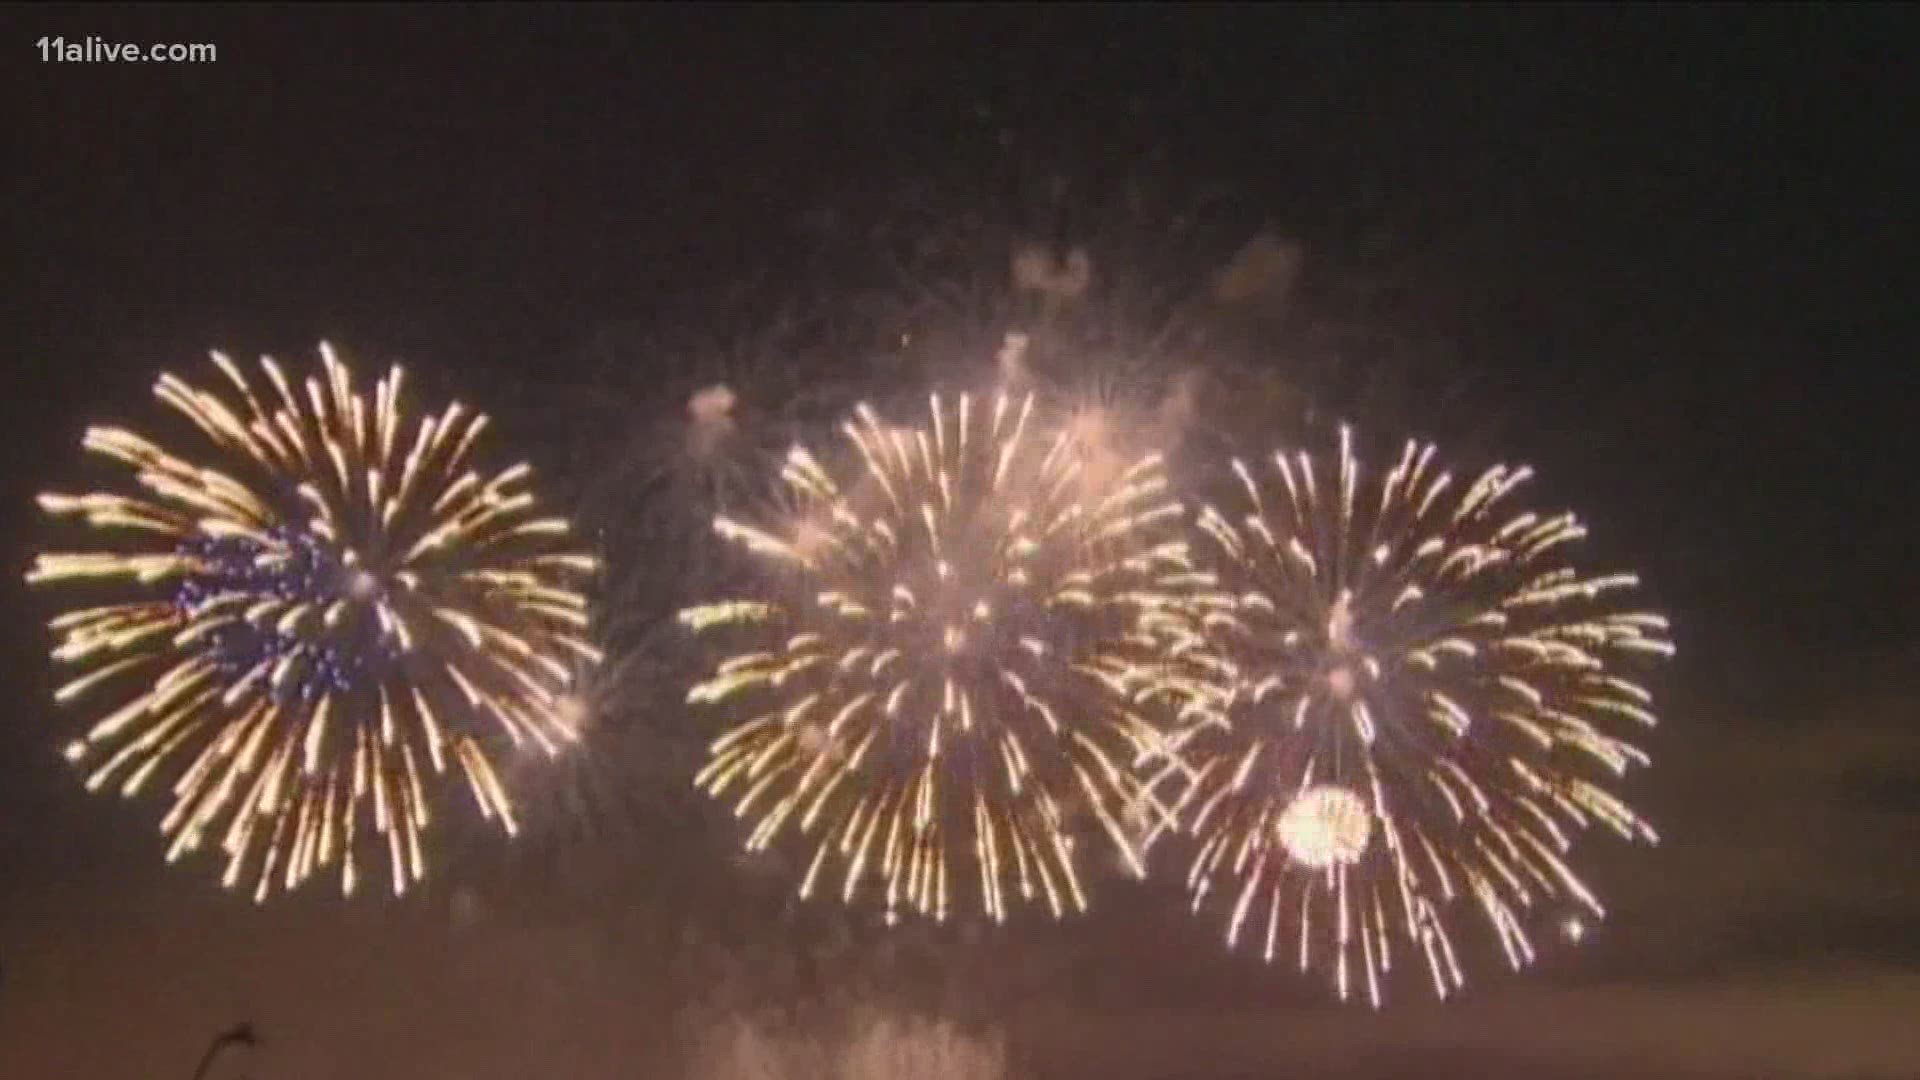 The pandemic has halted many community firework displays. Now, families are turning to celebrations at home.